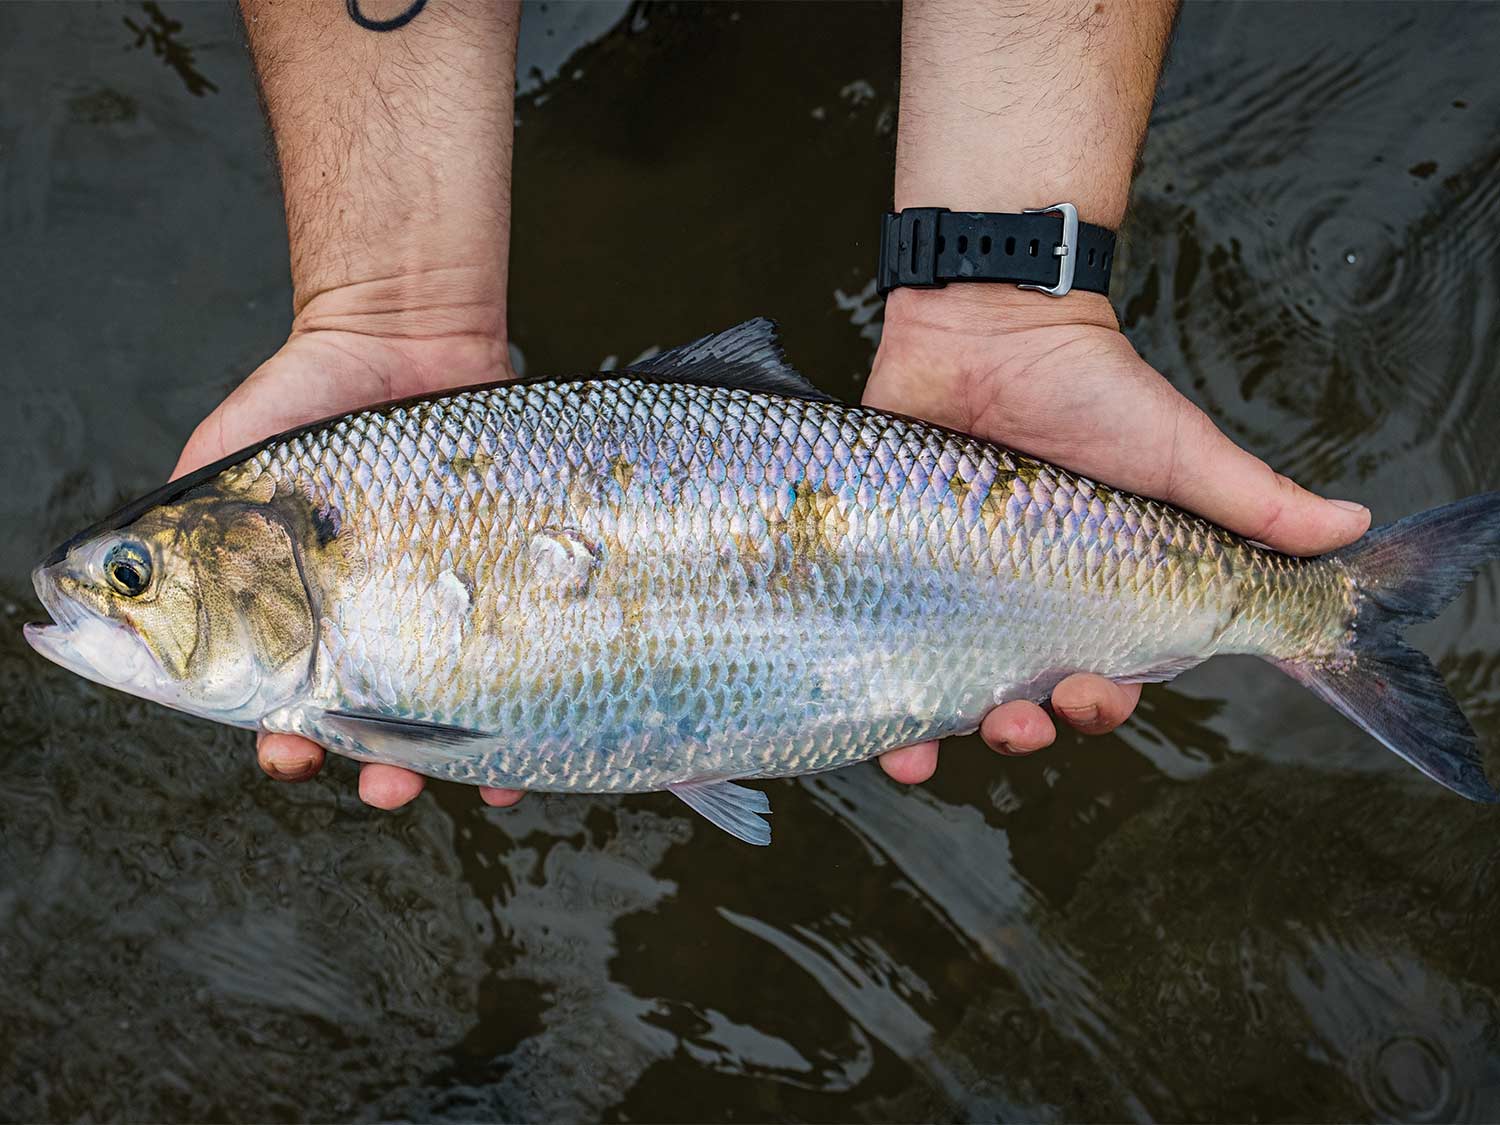 An American shad in the river.